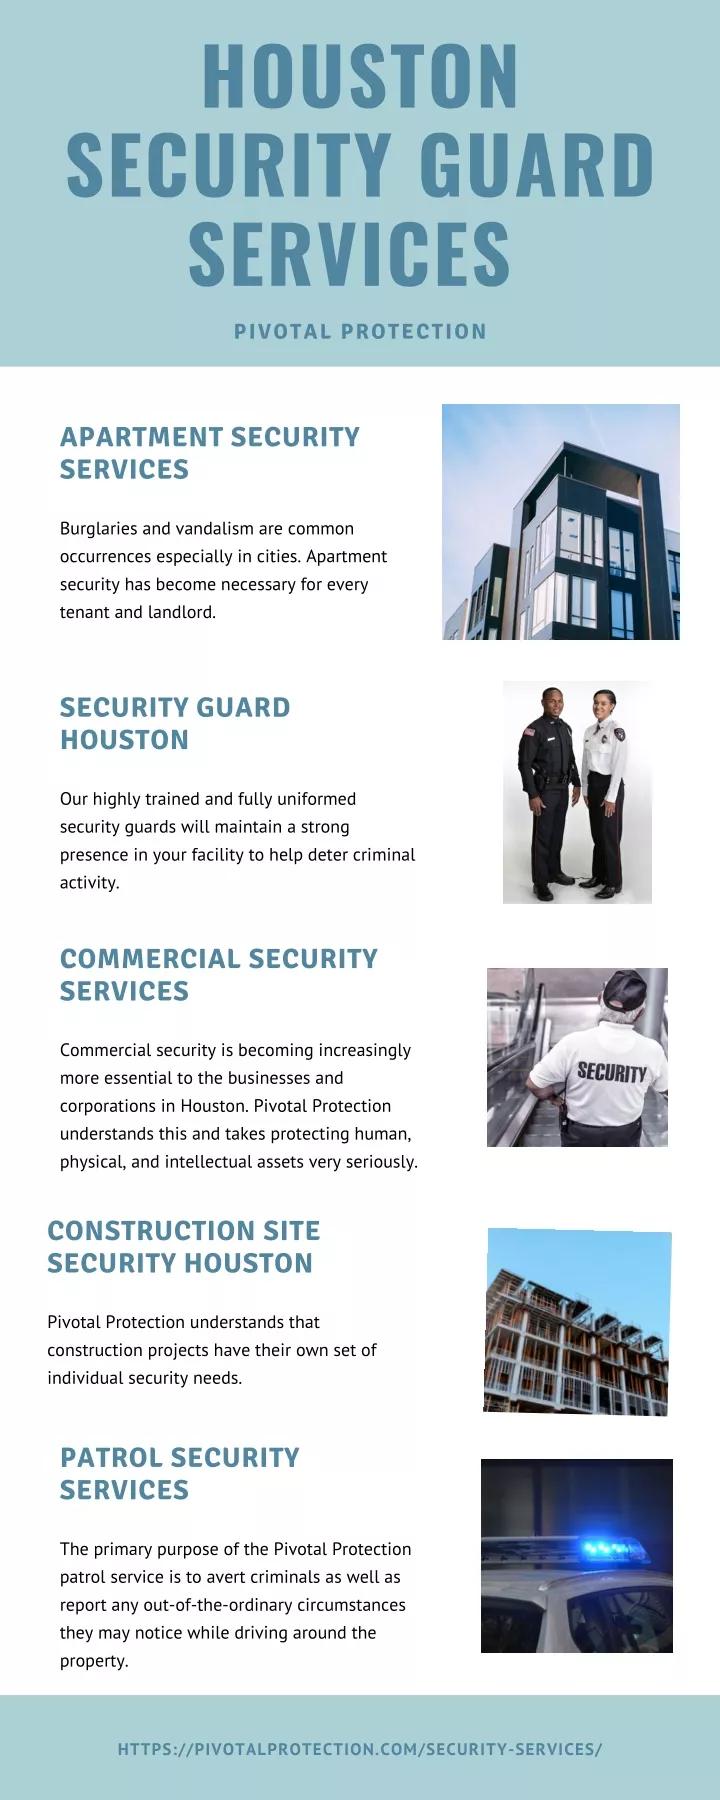 houston security guard services pivotal protection